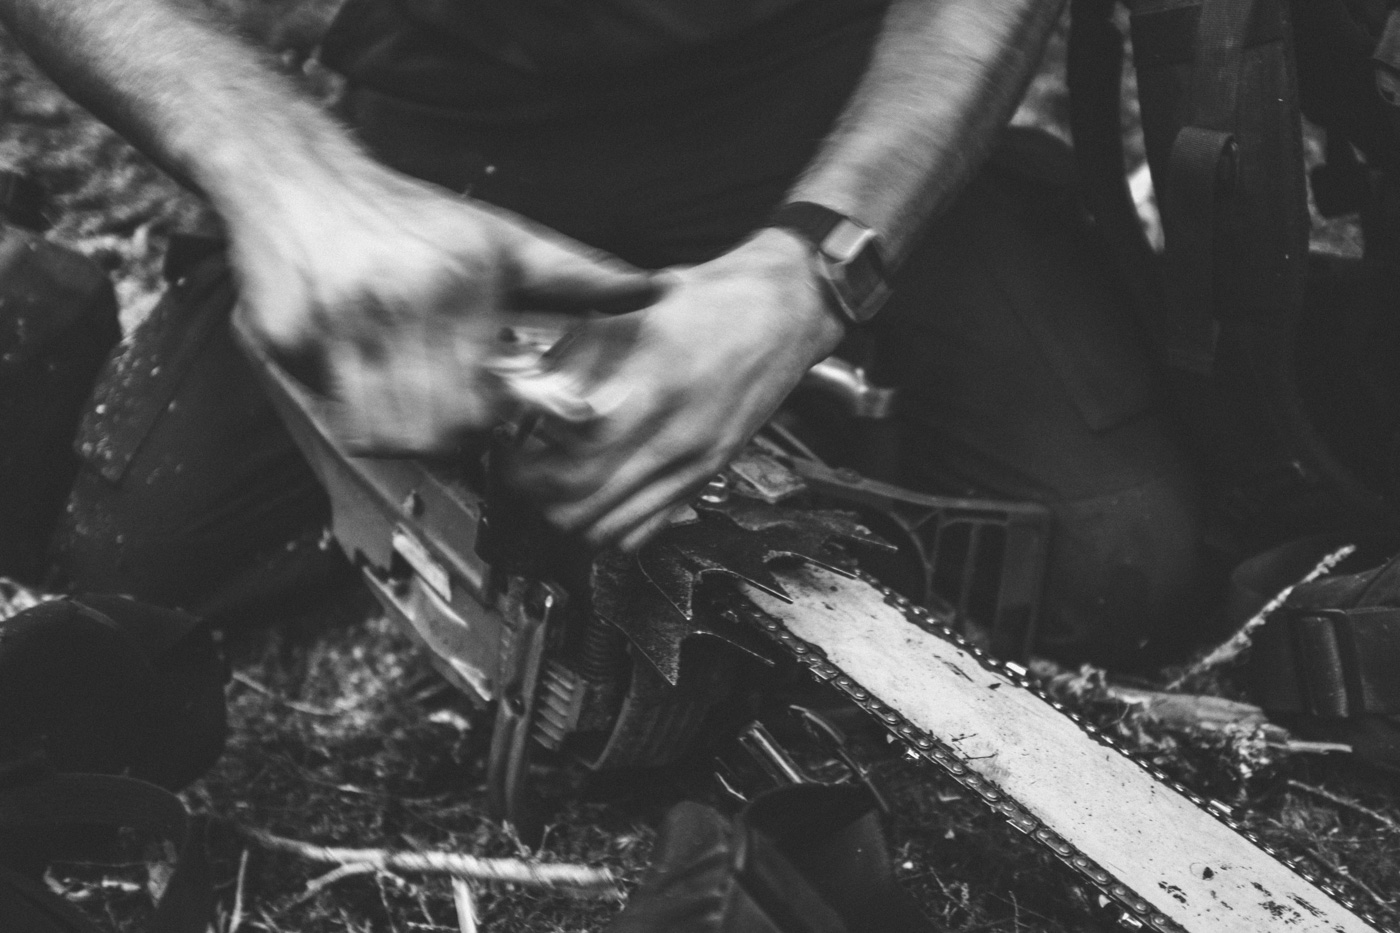  Fast hands working on getting a chain saw back in the fight. With limited resources at hand, cutters must become well-acquainted with small engine maintenance and be able to get a saw back up and running with maybe a bit of duct tape and a bar wrenc